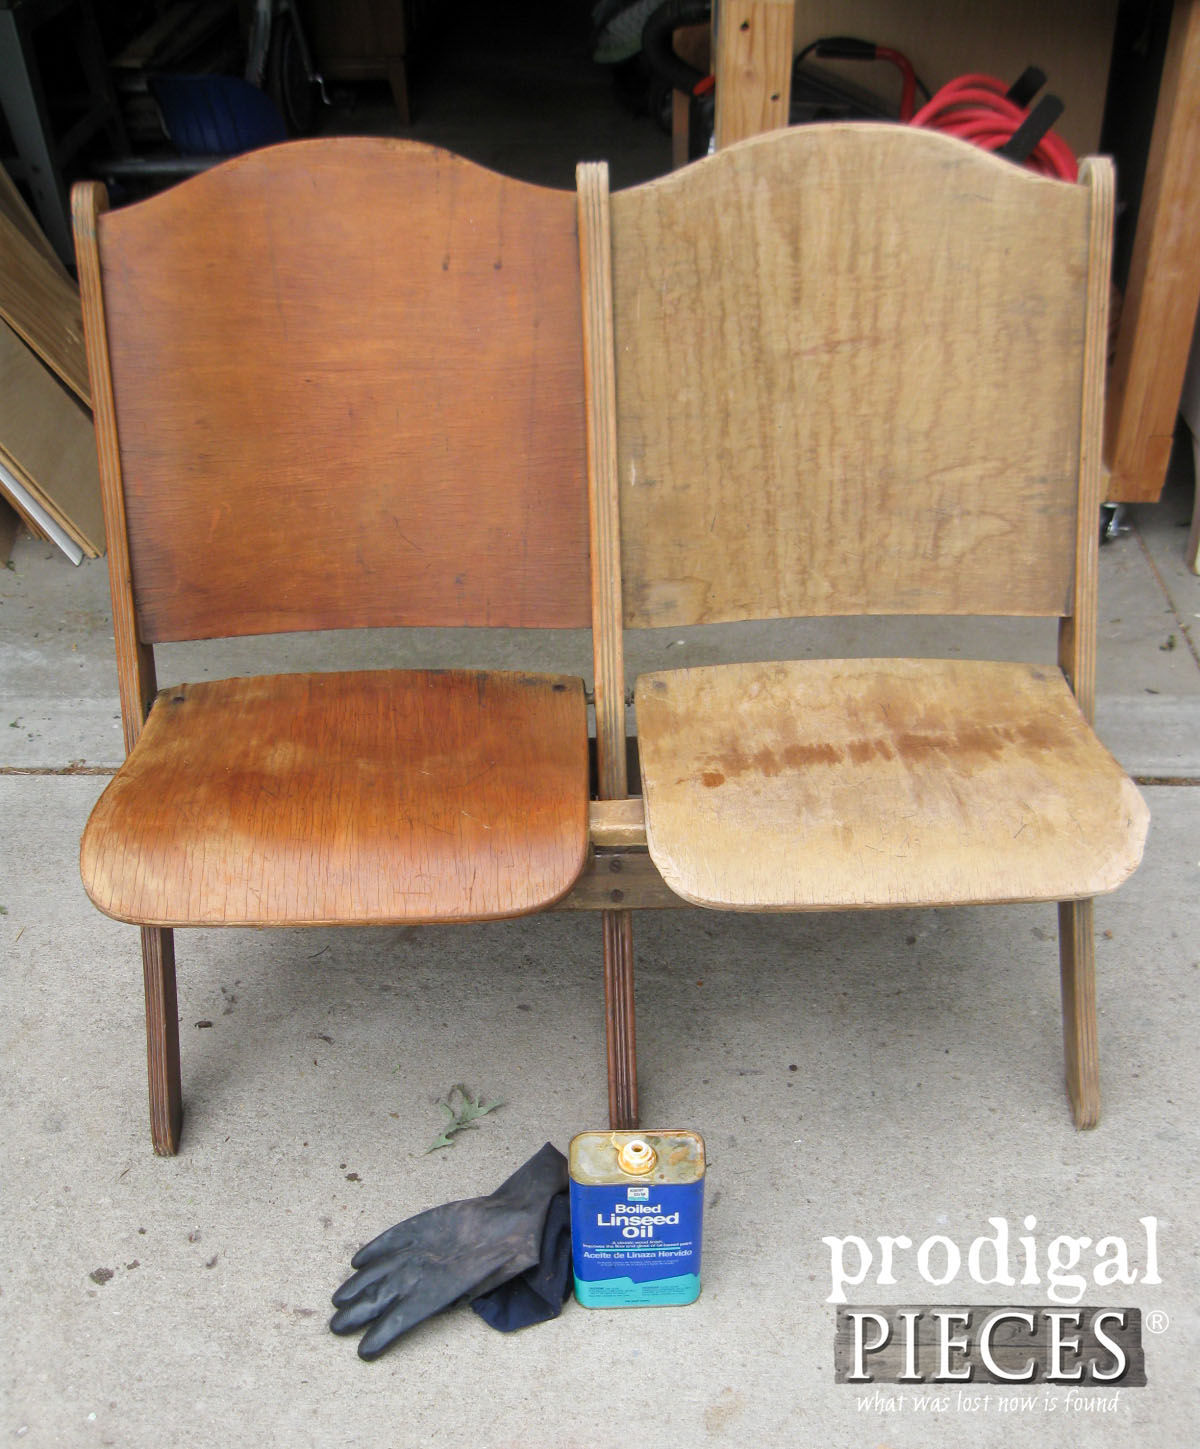 Old Theater Seats Revived with Easy Treatment to Refresh Old Wood | Prodigal Pieces | prodigalpieces.com